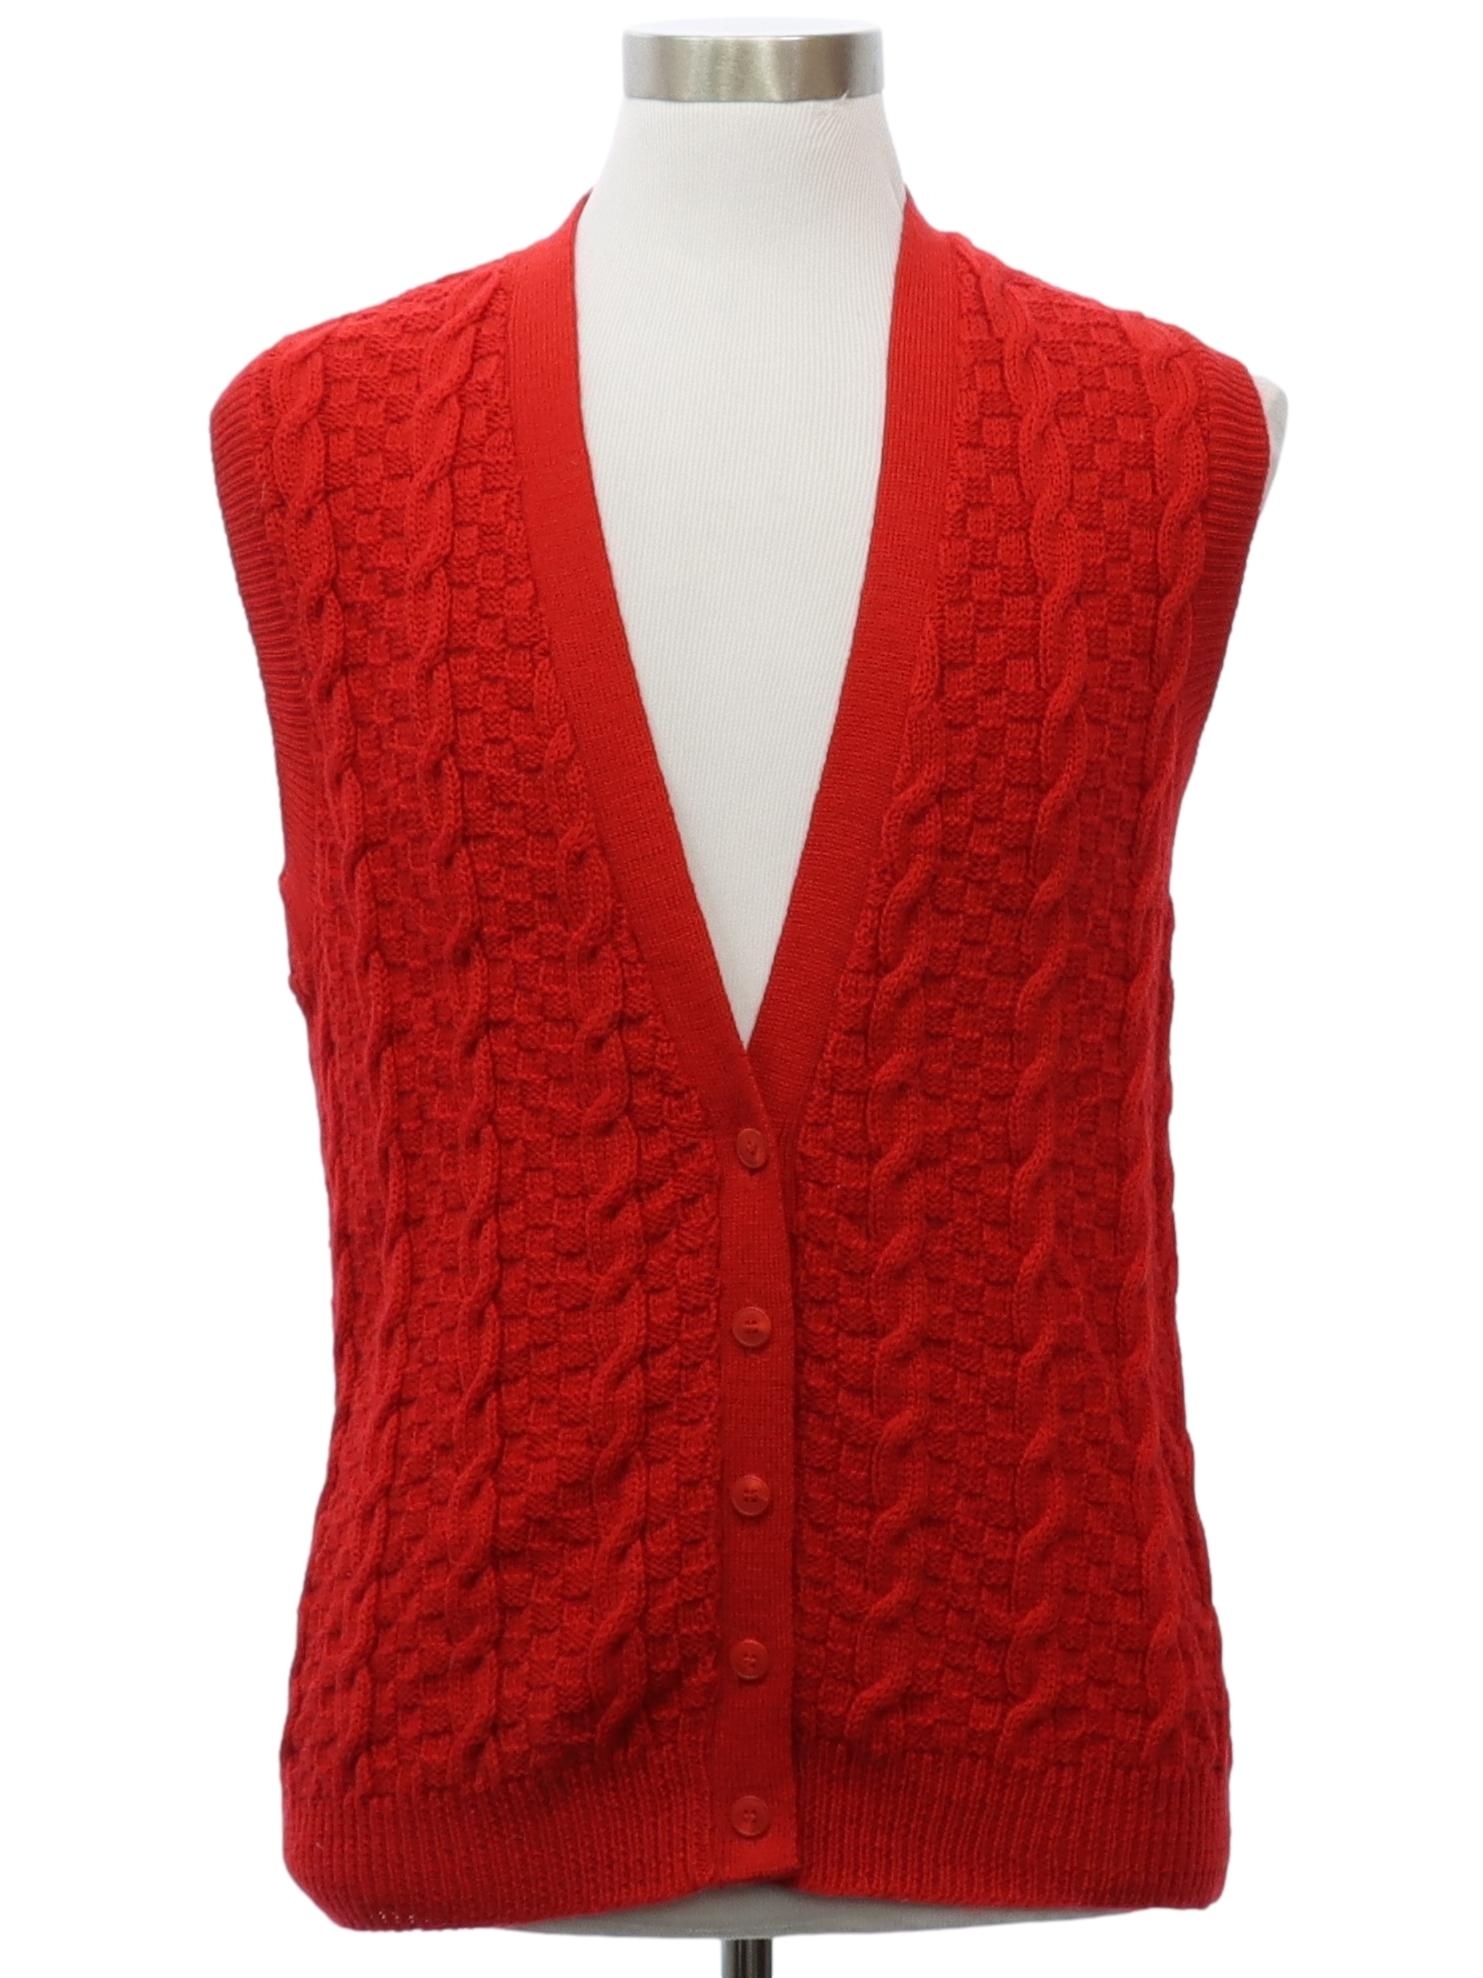 voorstel Aanleg Slink Vintage 1990's Sweater: 90s or Newer -Pendleton- Mens hunter red wool  sleeveless vest having ribbed knit finishing the armholes and a flat knit  purl front button band with five buttons fastening it.